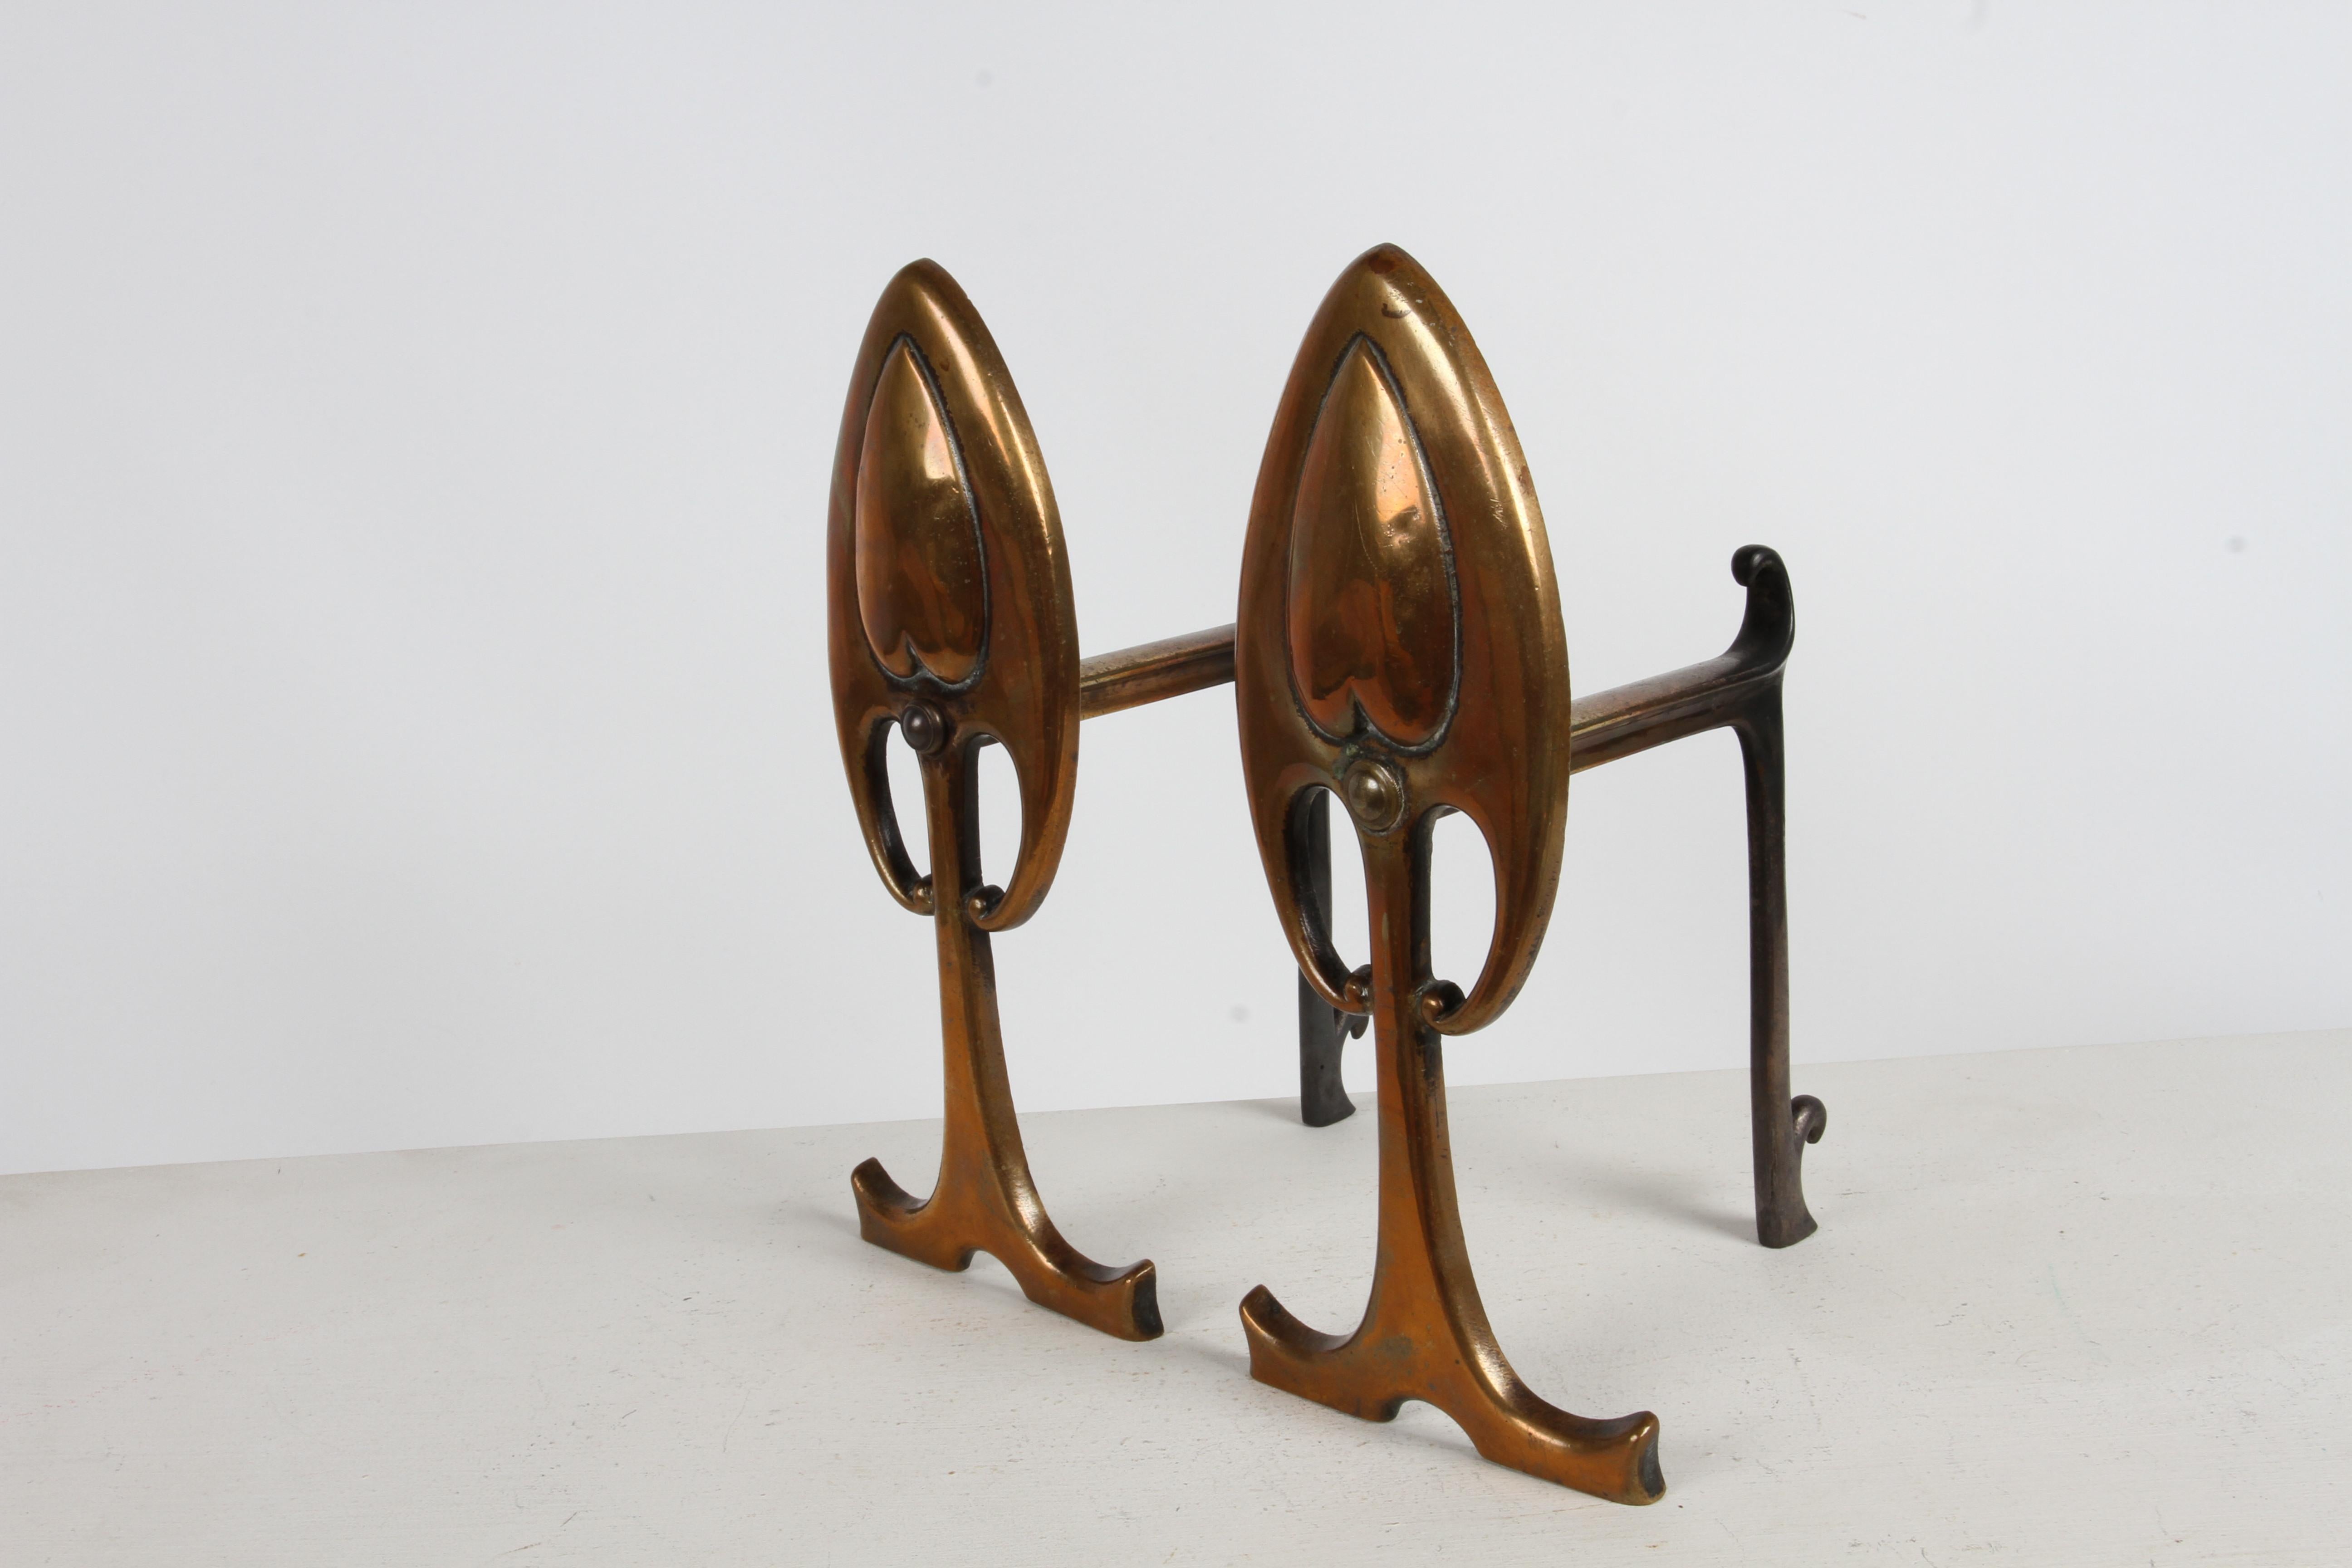 Art Nouveau or Aesthetic Movement Period Bronze Andirons - Firedogs in Repoussee For Sale 1